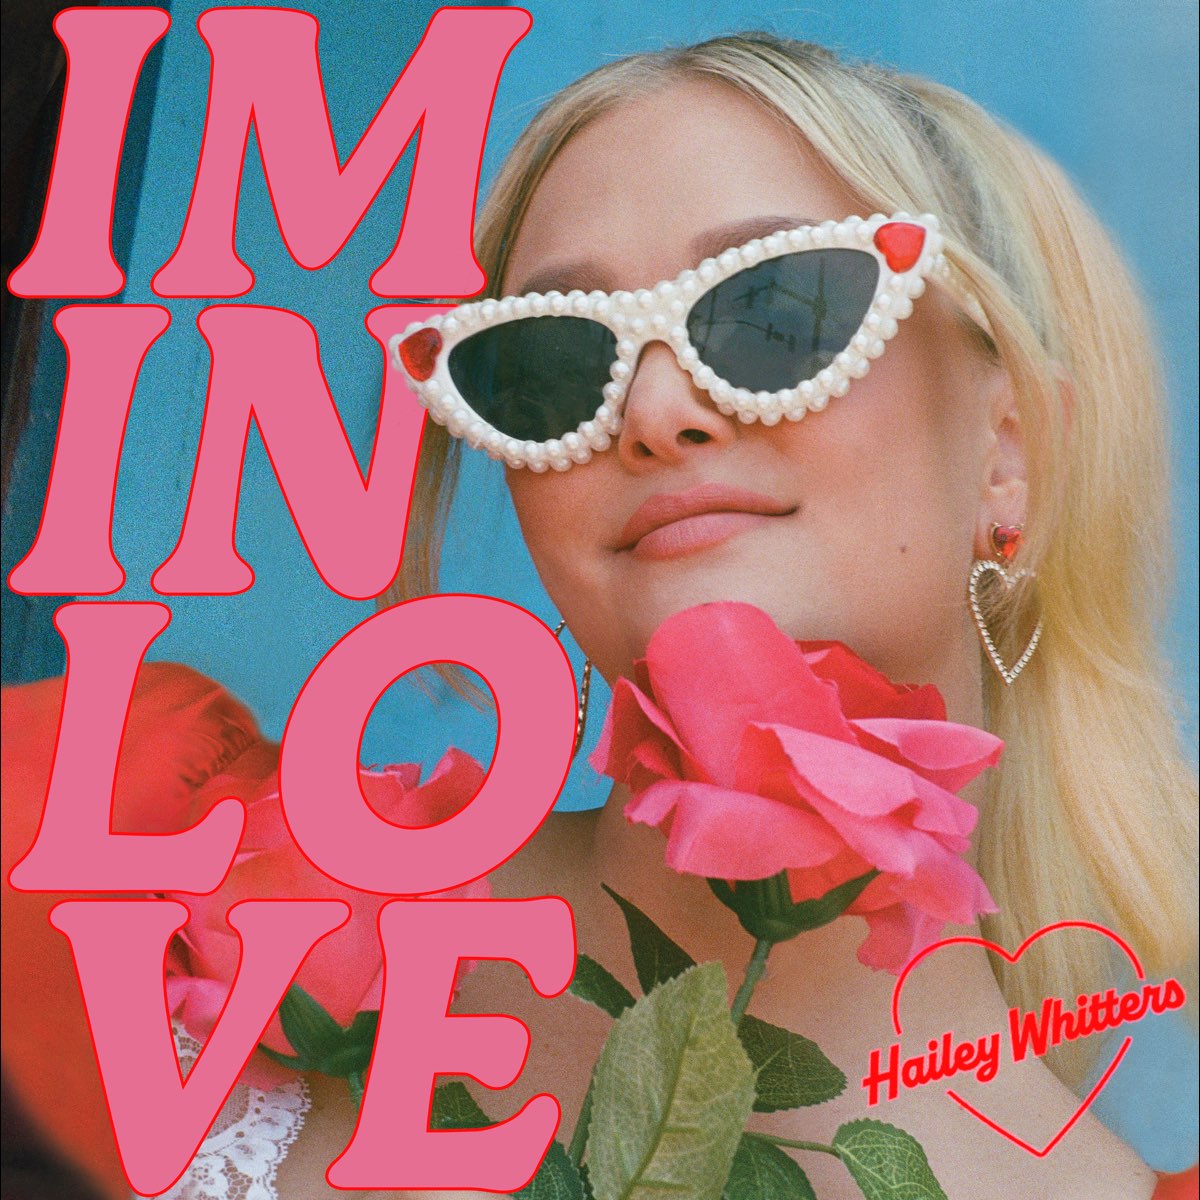 Hailey Whitters I&#039;m In Love cover artwork